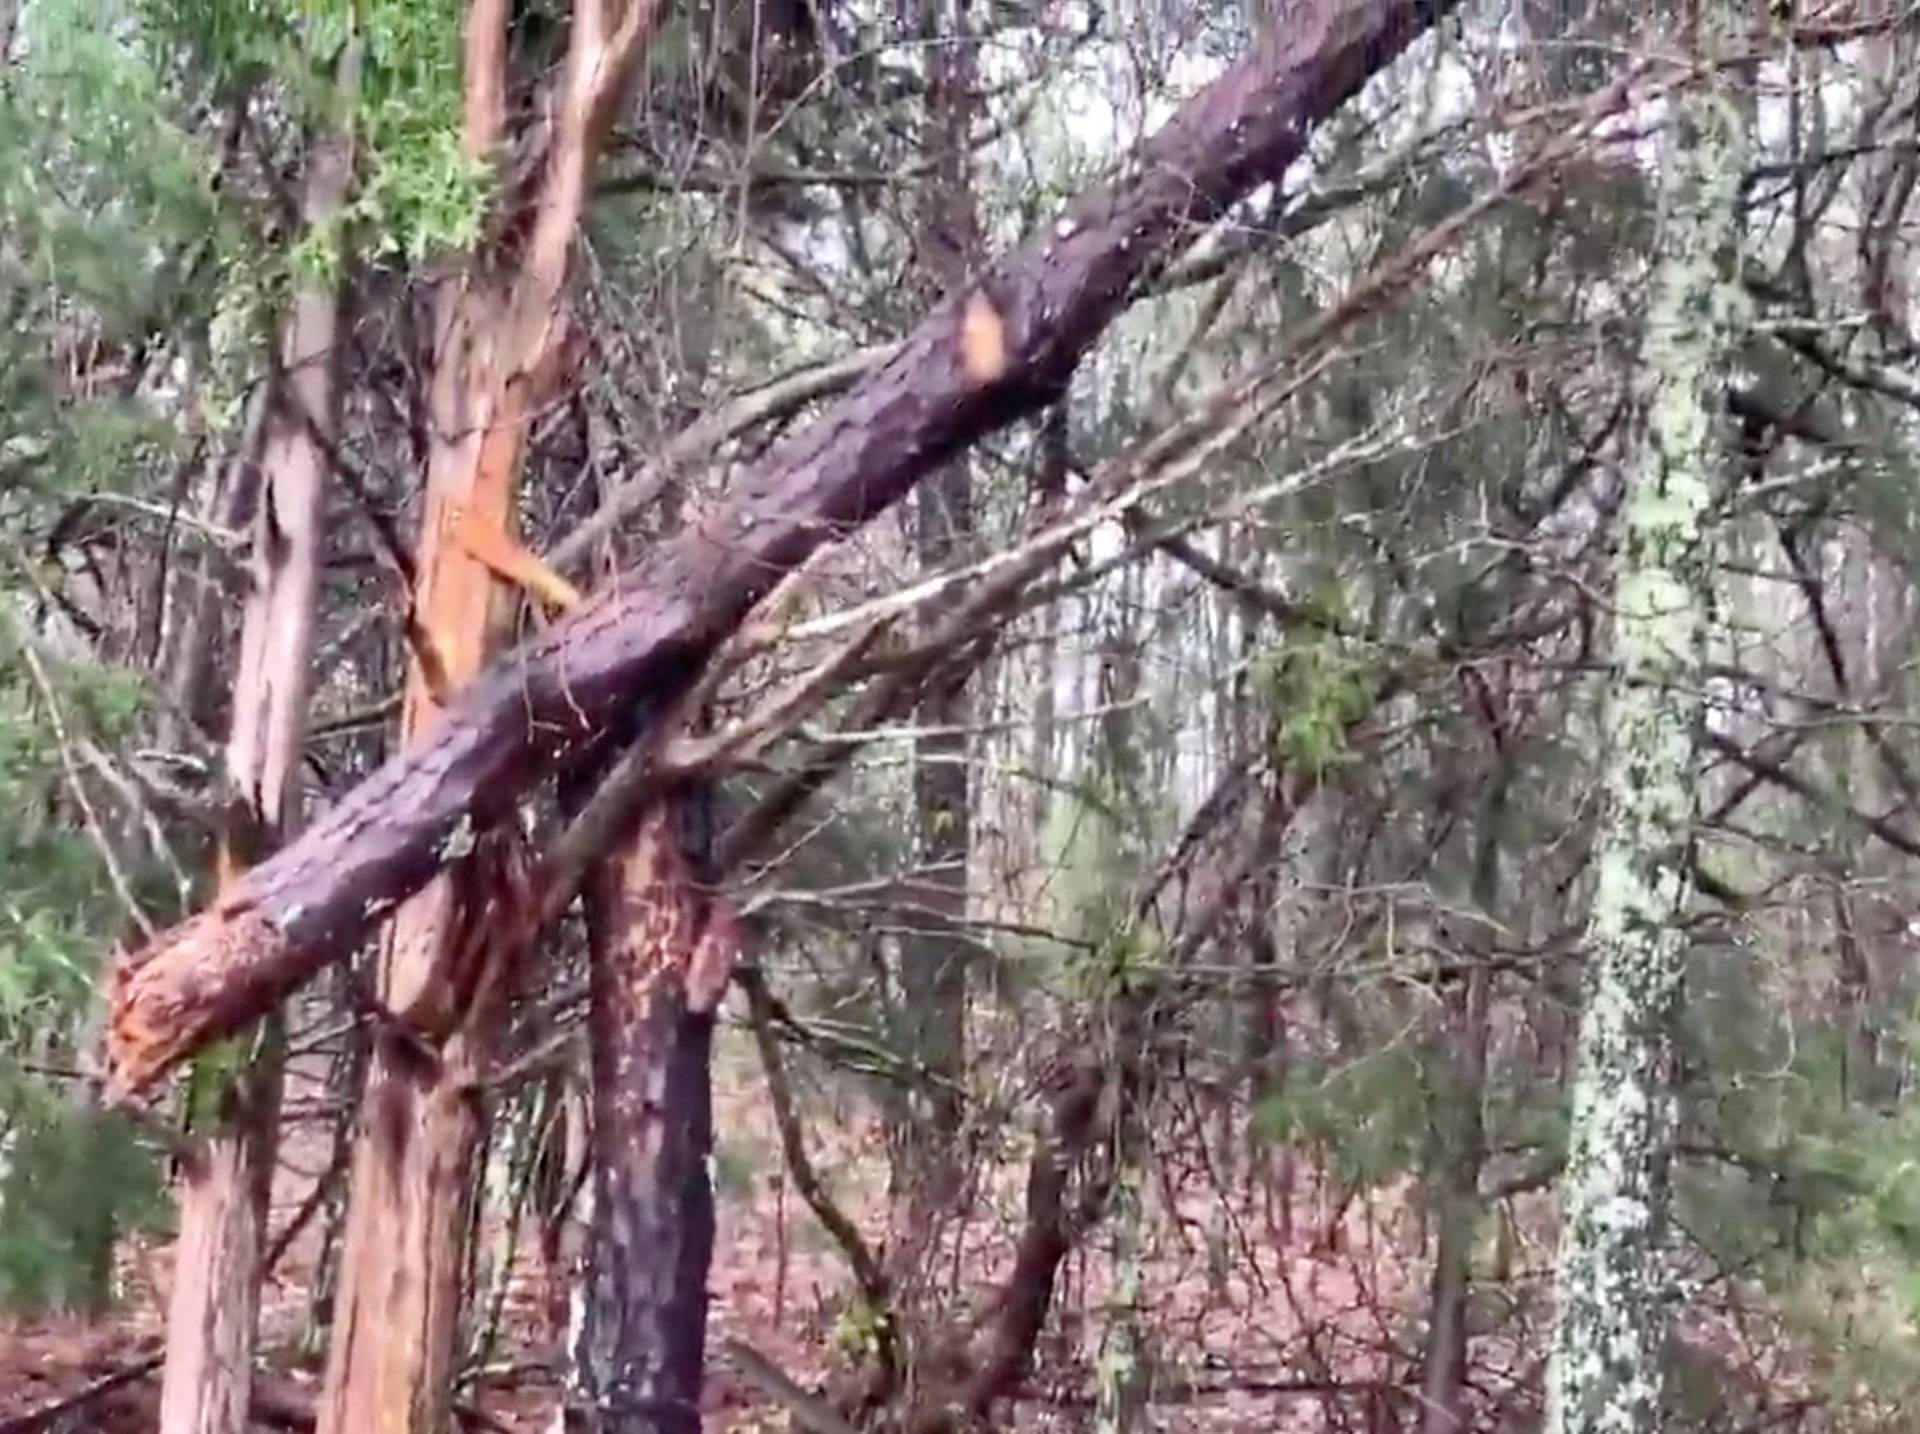 Damaged trees seen following a tornado in Beauregard, Alabama, U.S. in this March 3, 2019 still image obtained from social media video